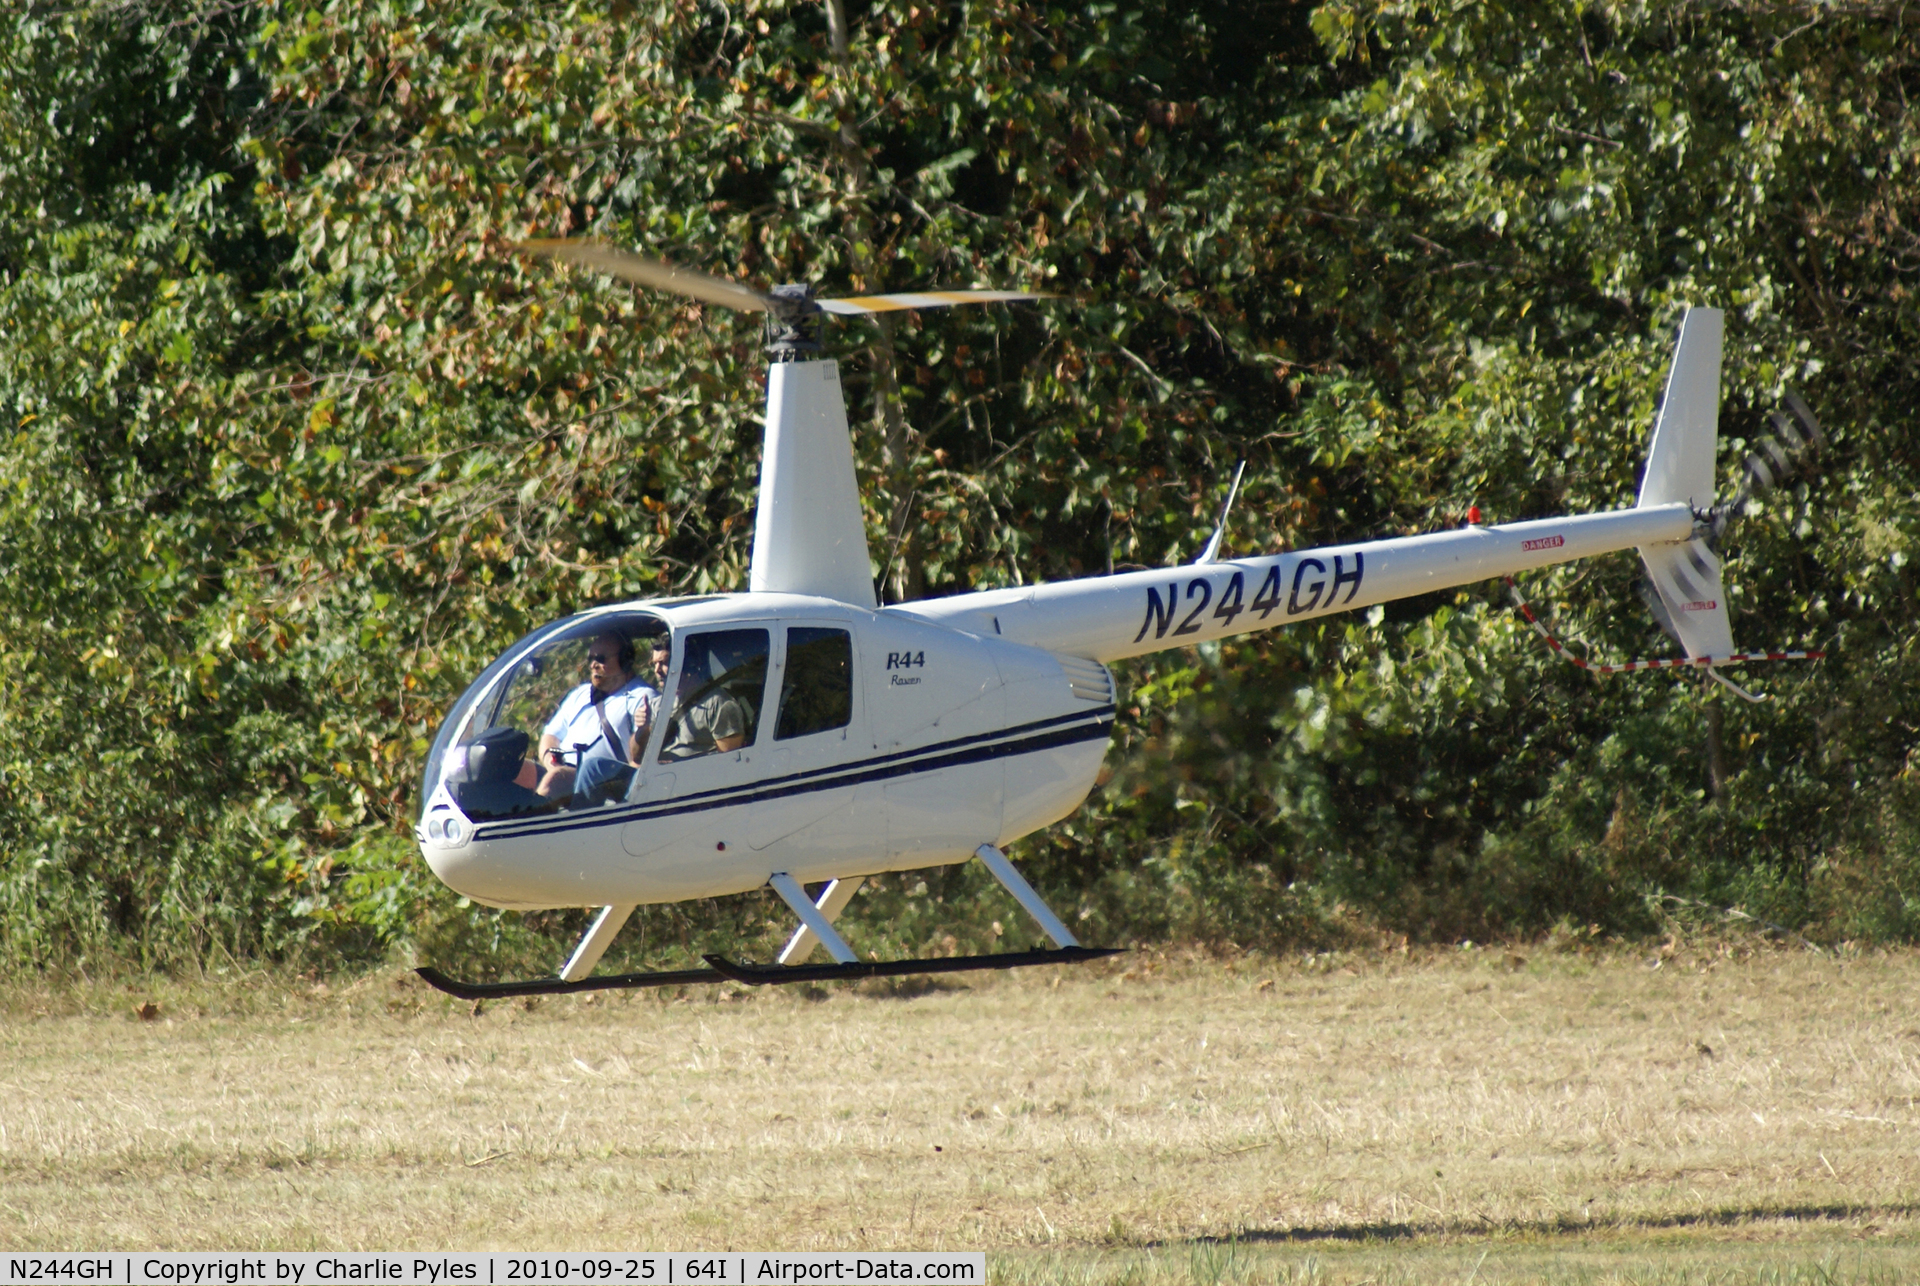 N244GH, 2000 Robinson R44 C/N 0833, First shot of this Helo on A-D.com